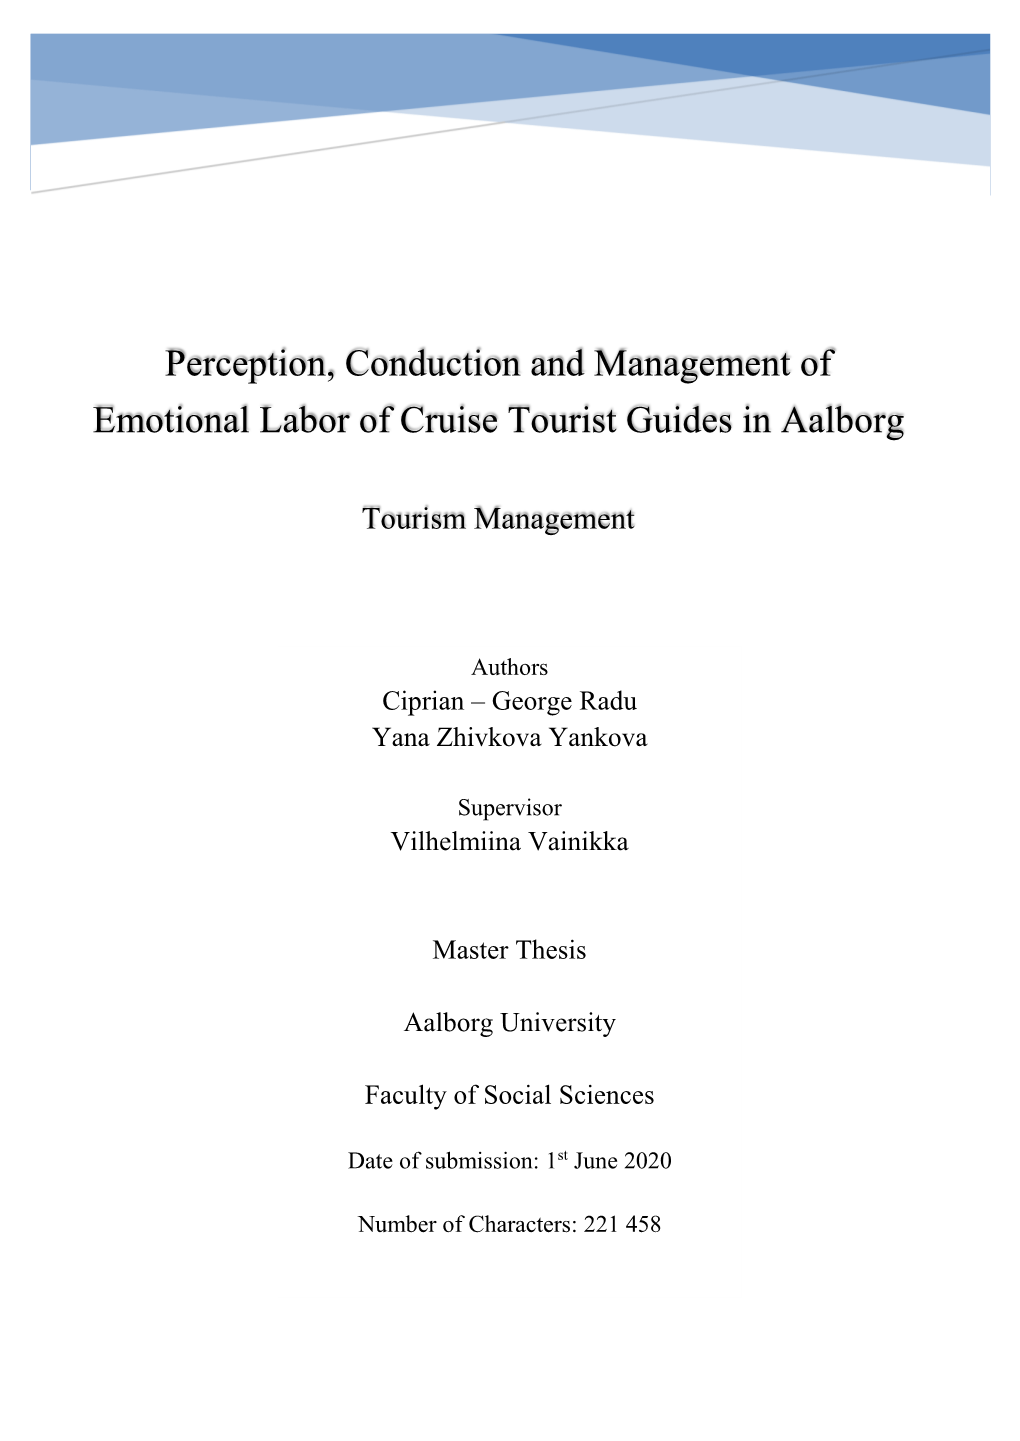 Perception, Conduction and Management of Emotional Labor of Cruise Tourist Guides in Aalborg